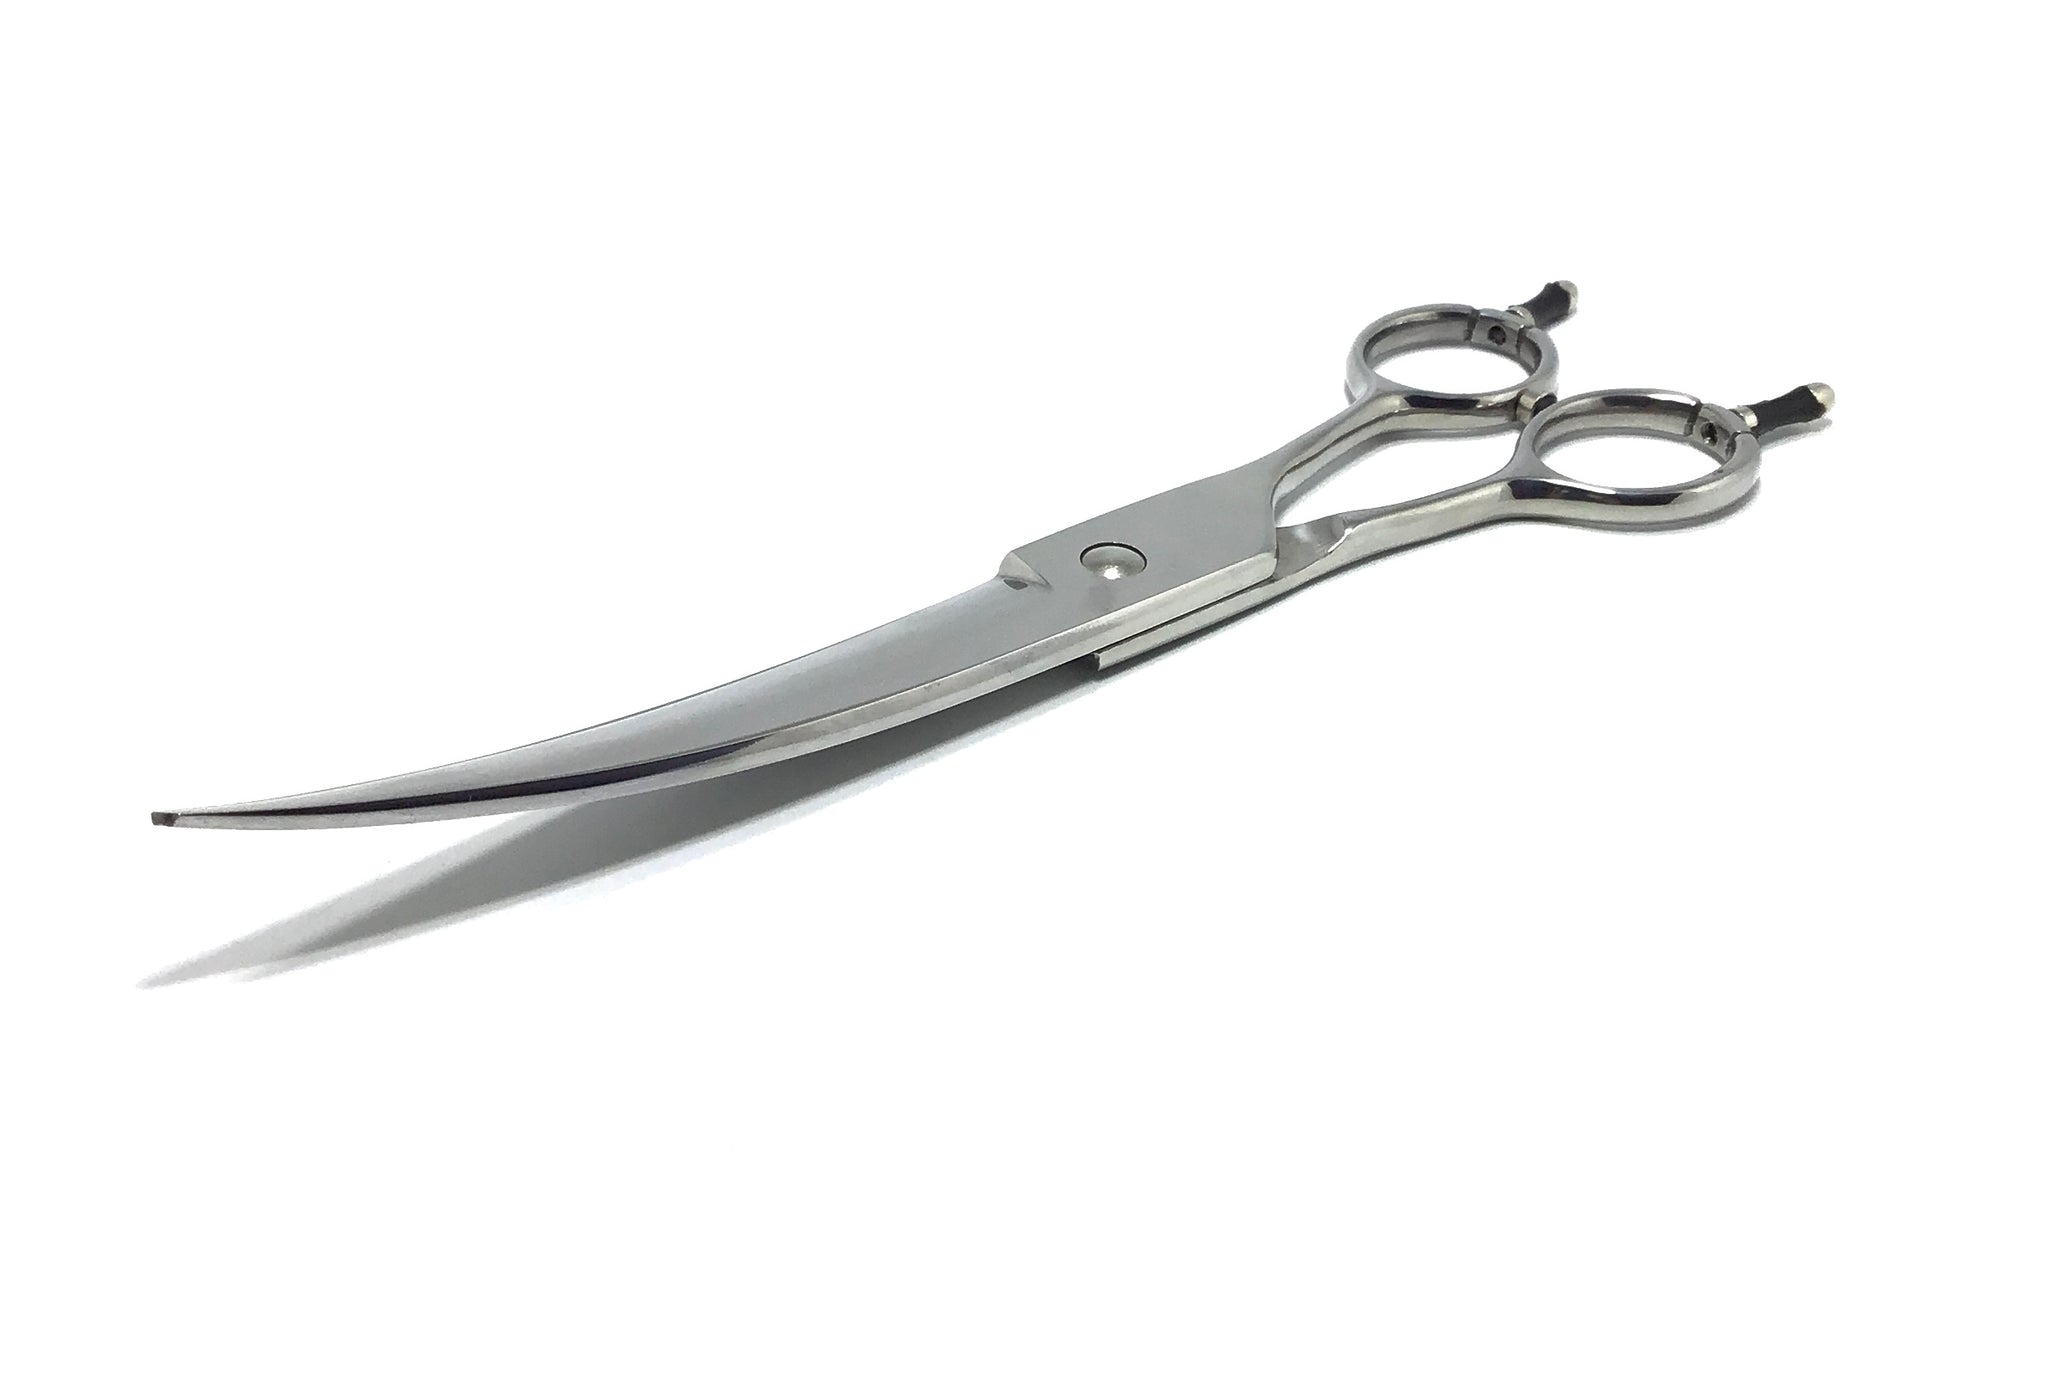 What Are the Best Scissors? Luxury Blades Win for Artistry, Function -  Bloomberg